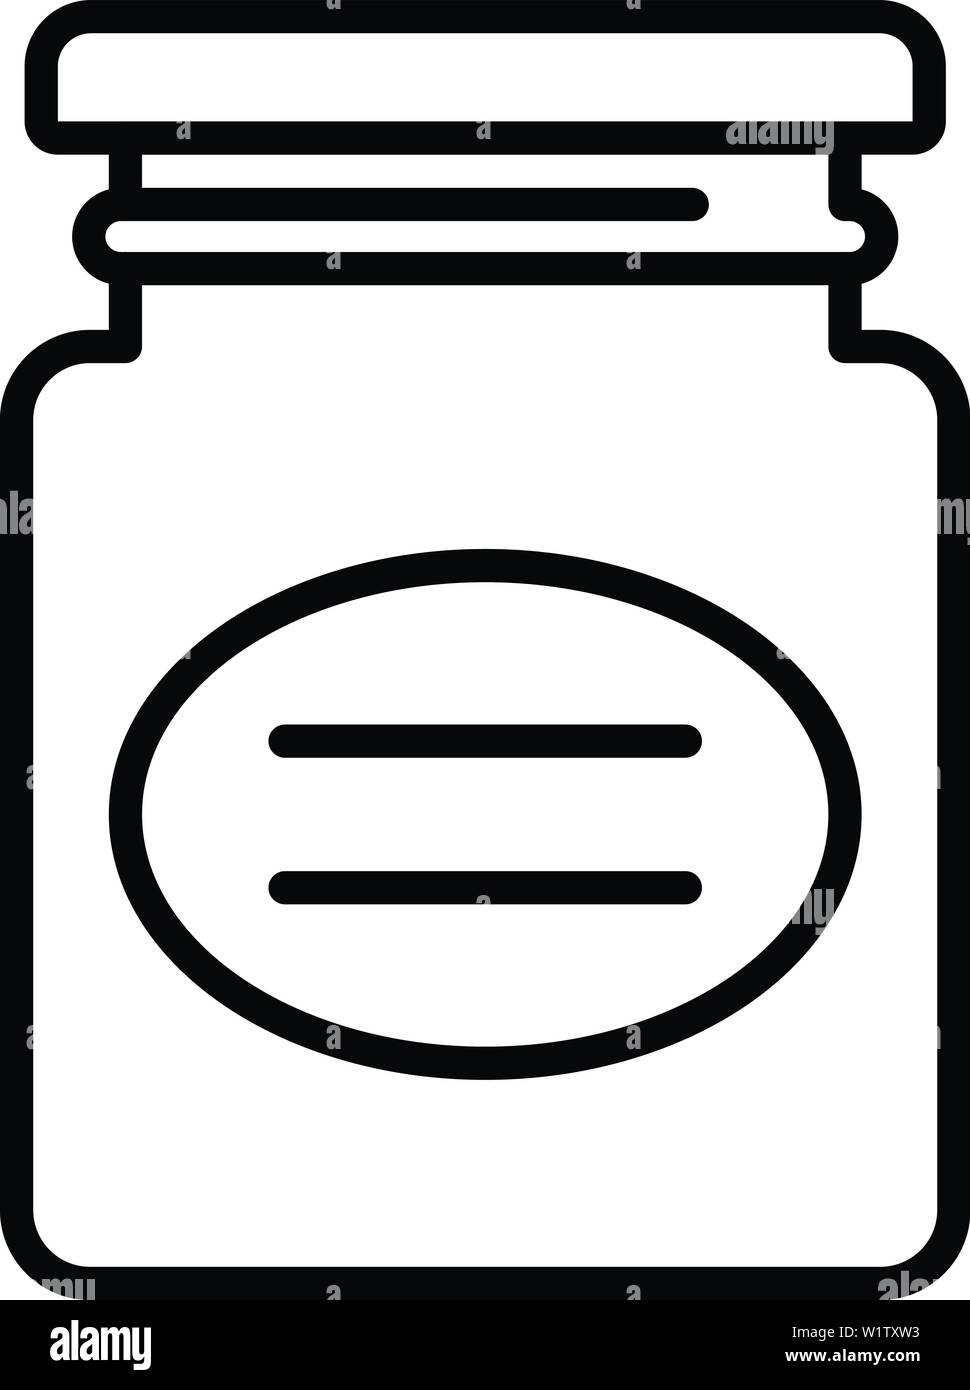 Food jam jar icon, outline style Stock Vector